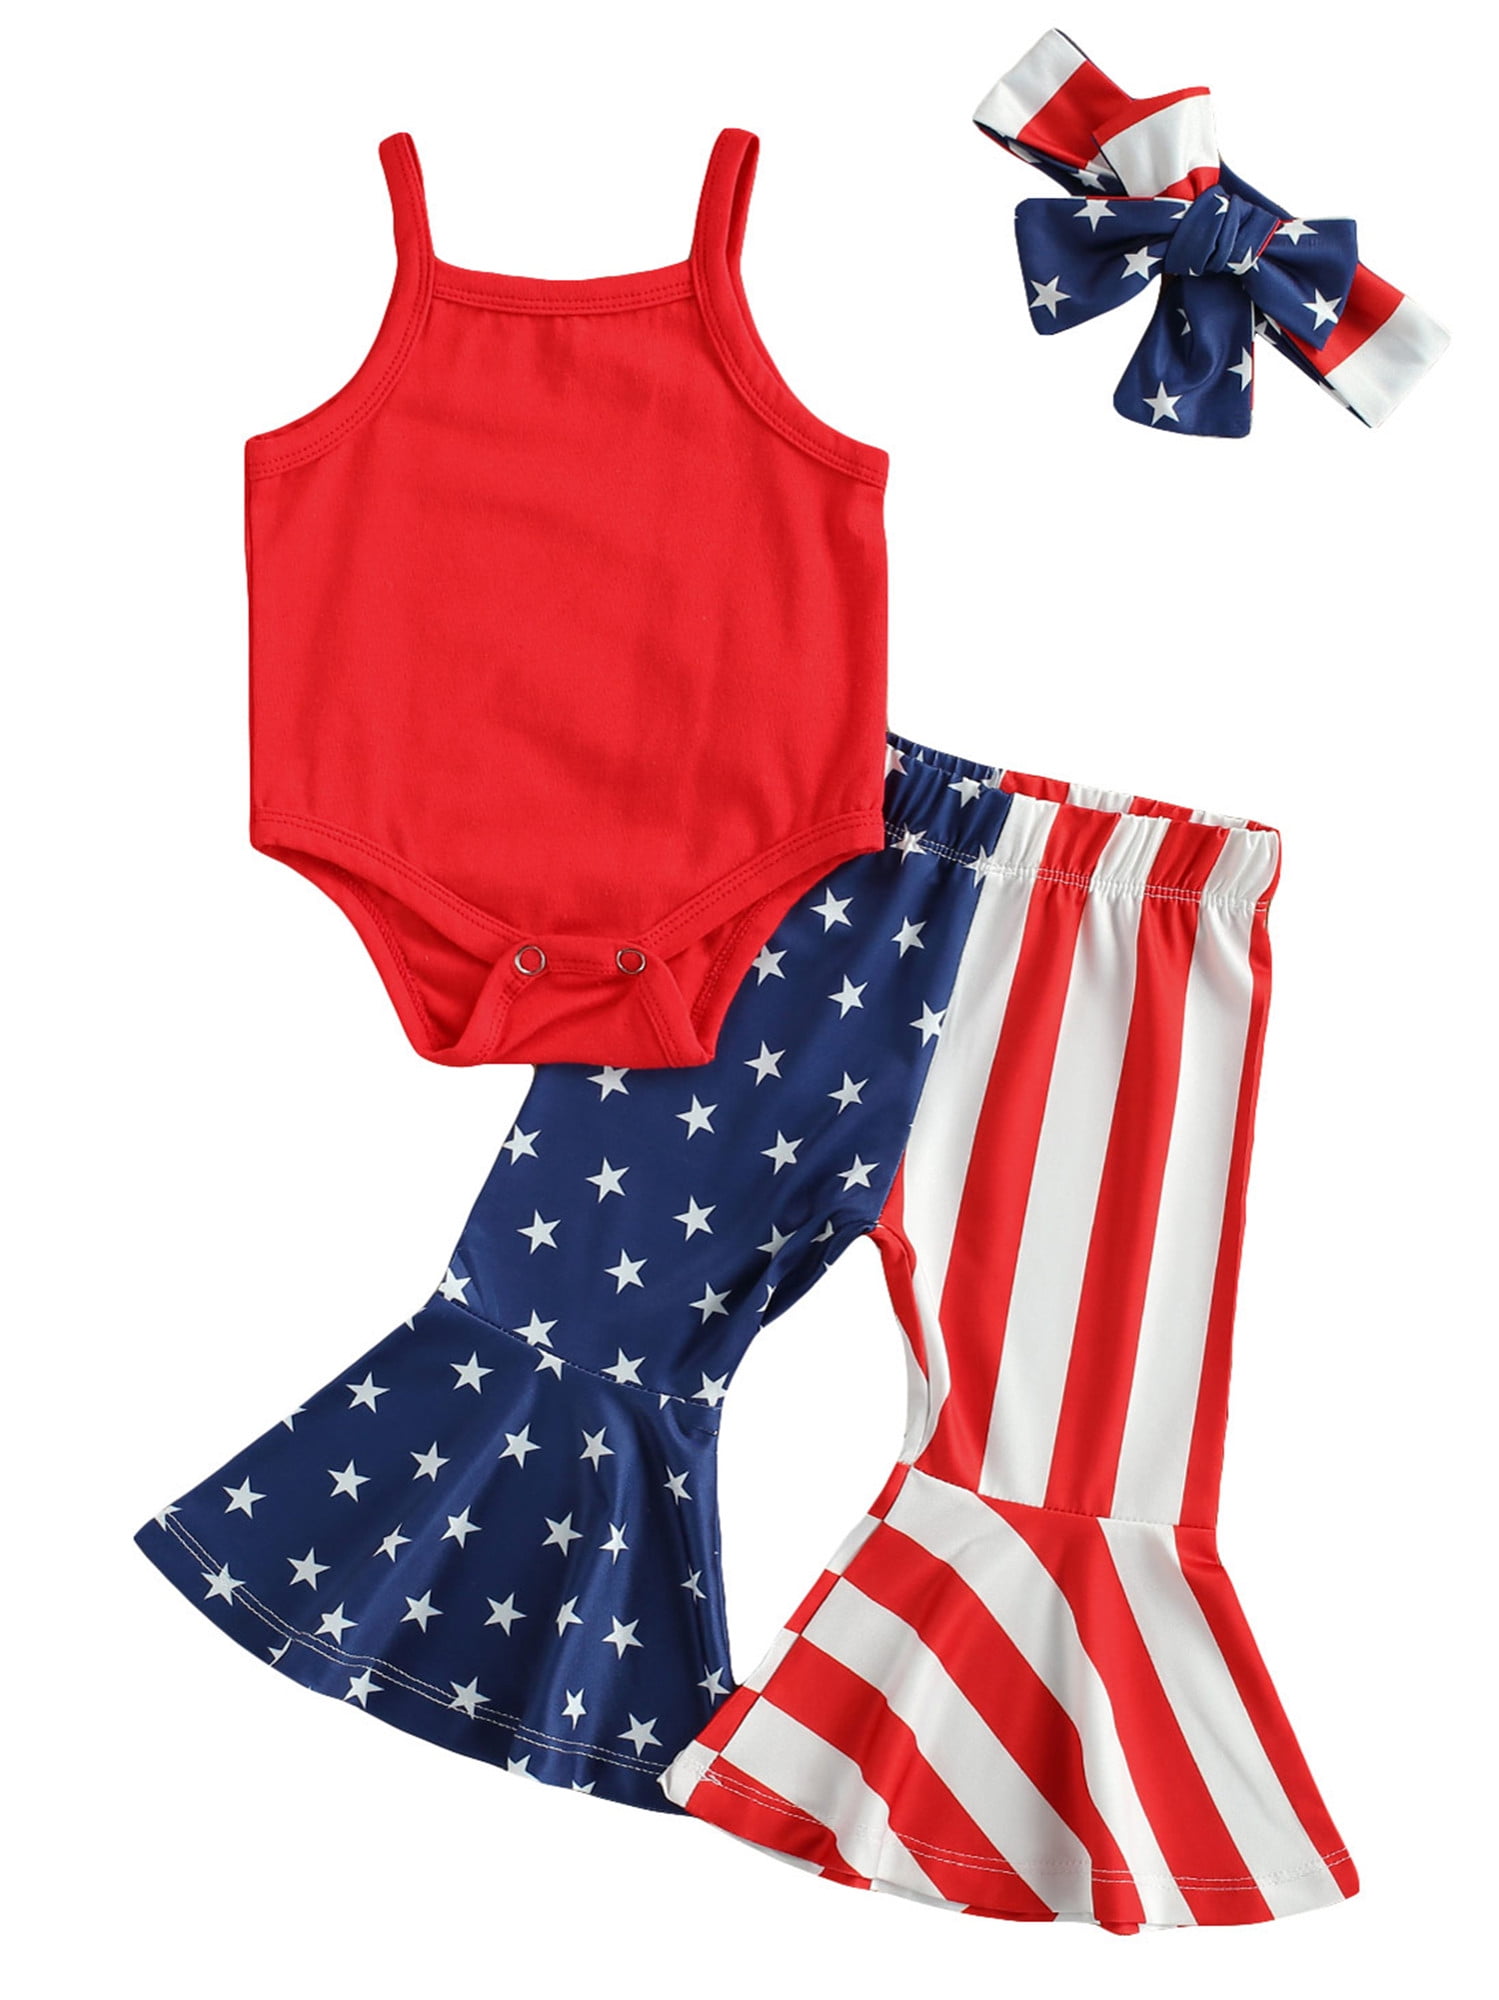 Aunavey Infant Baby Girl 4th of July Outfits Romper Flare Pants Bell ...